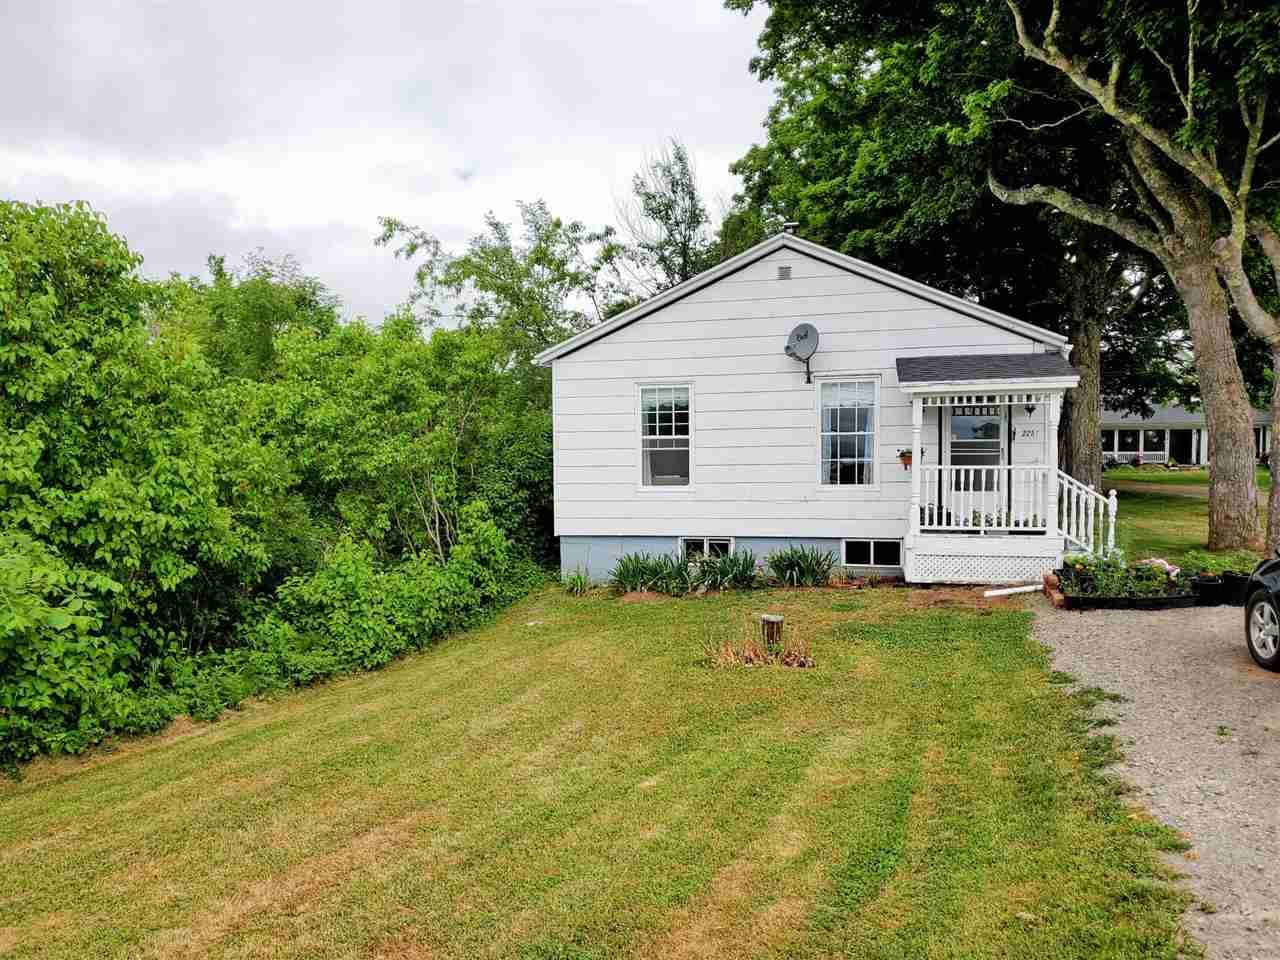 Main Photo: 2257 Highway 1 in Auburn: 404-Kings County Residential for sale (Annapolis Valley)  : MLS®# 202011078